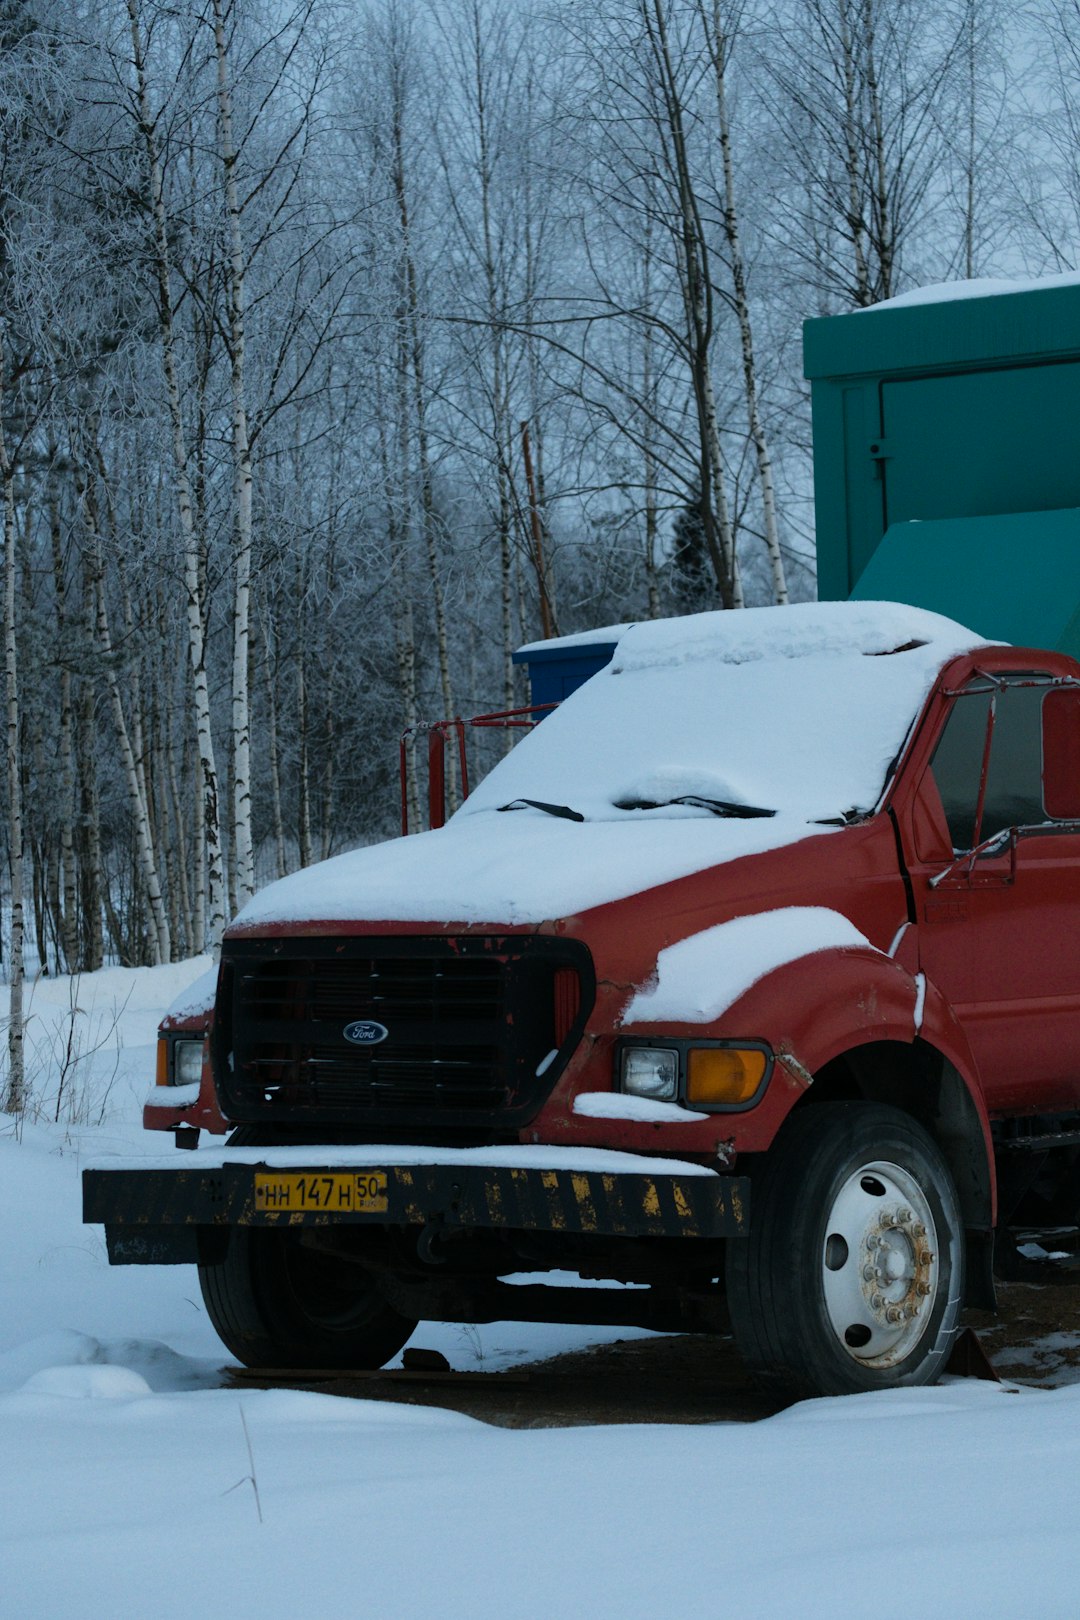 red chevrolet truck on snow covered ground during daytime